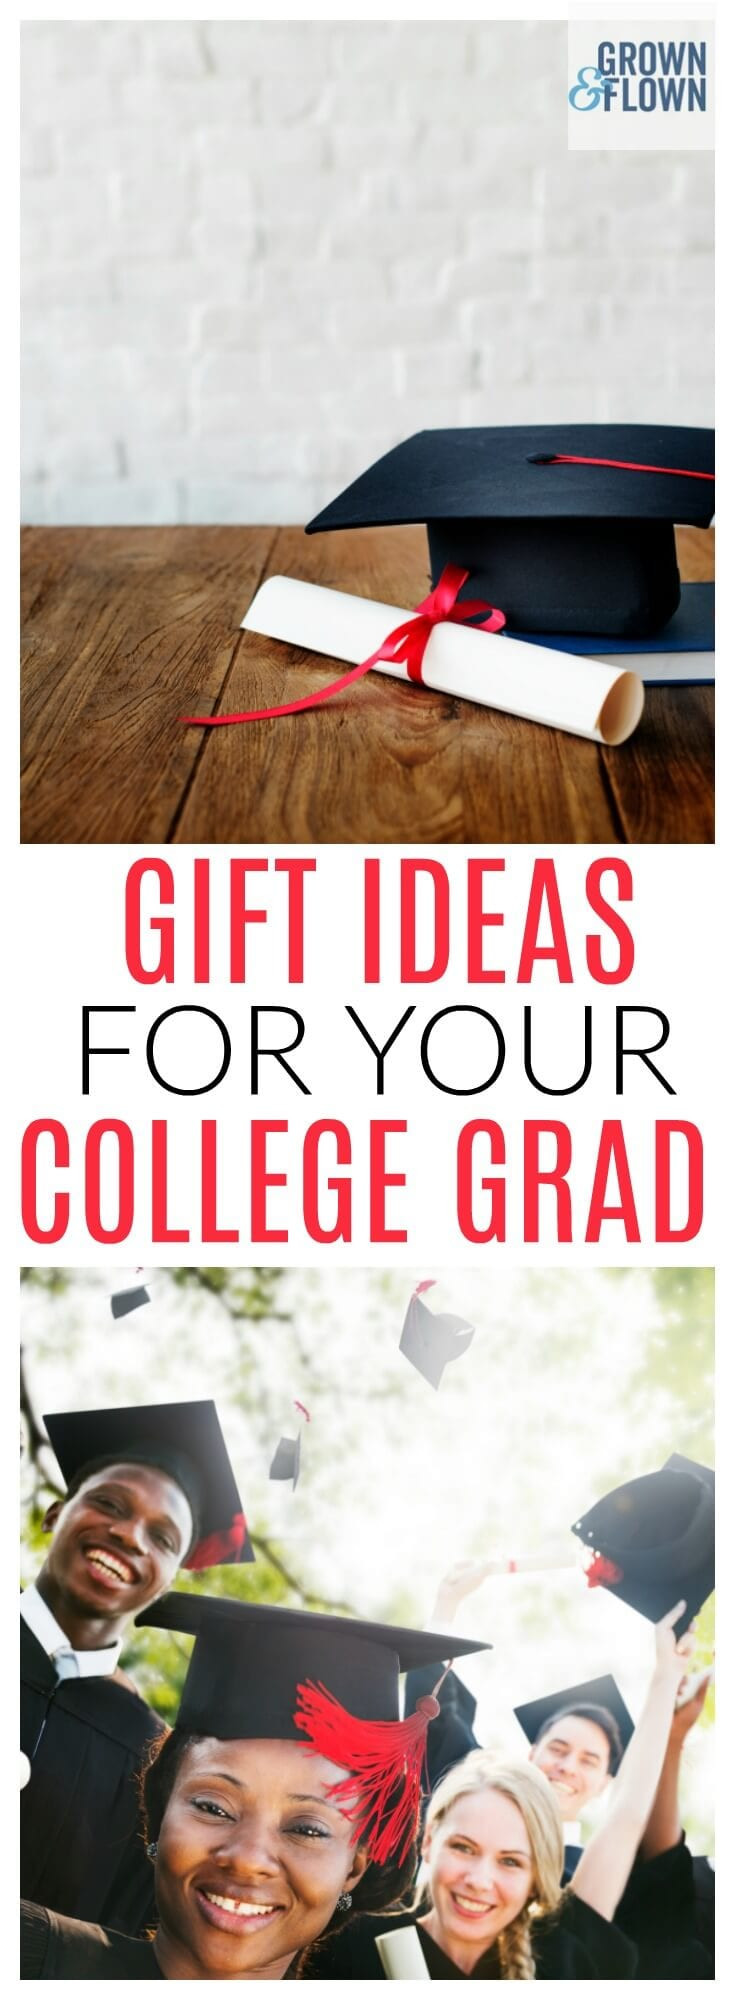 College Graduation Gift Ideas From Parents
 2019 College Graduation Gifts Your f to Work Kids Will Love